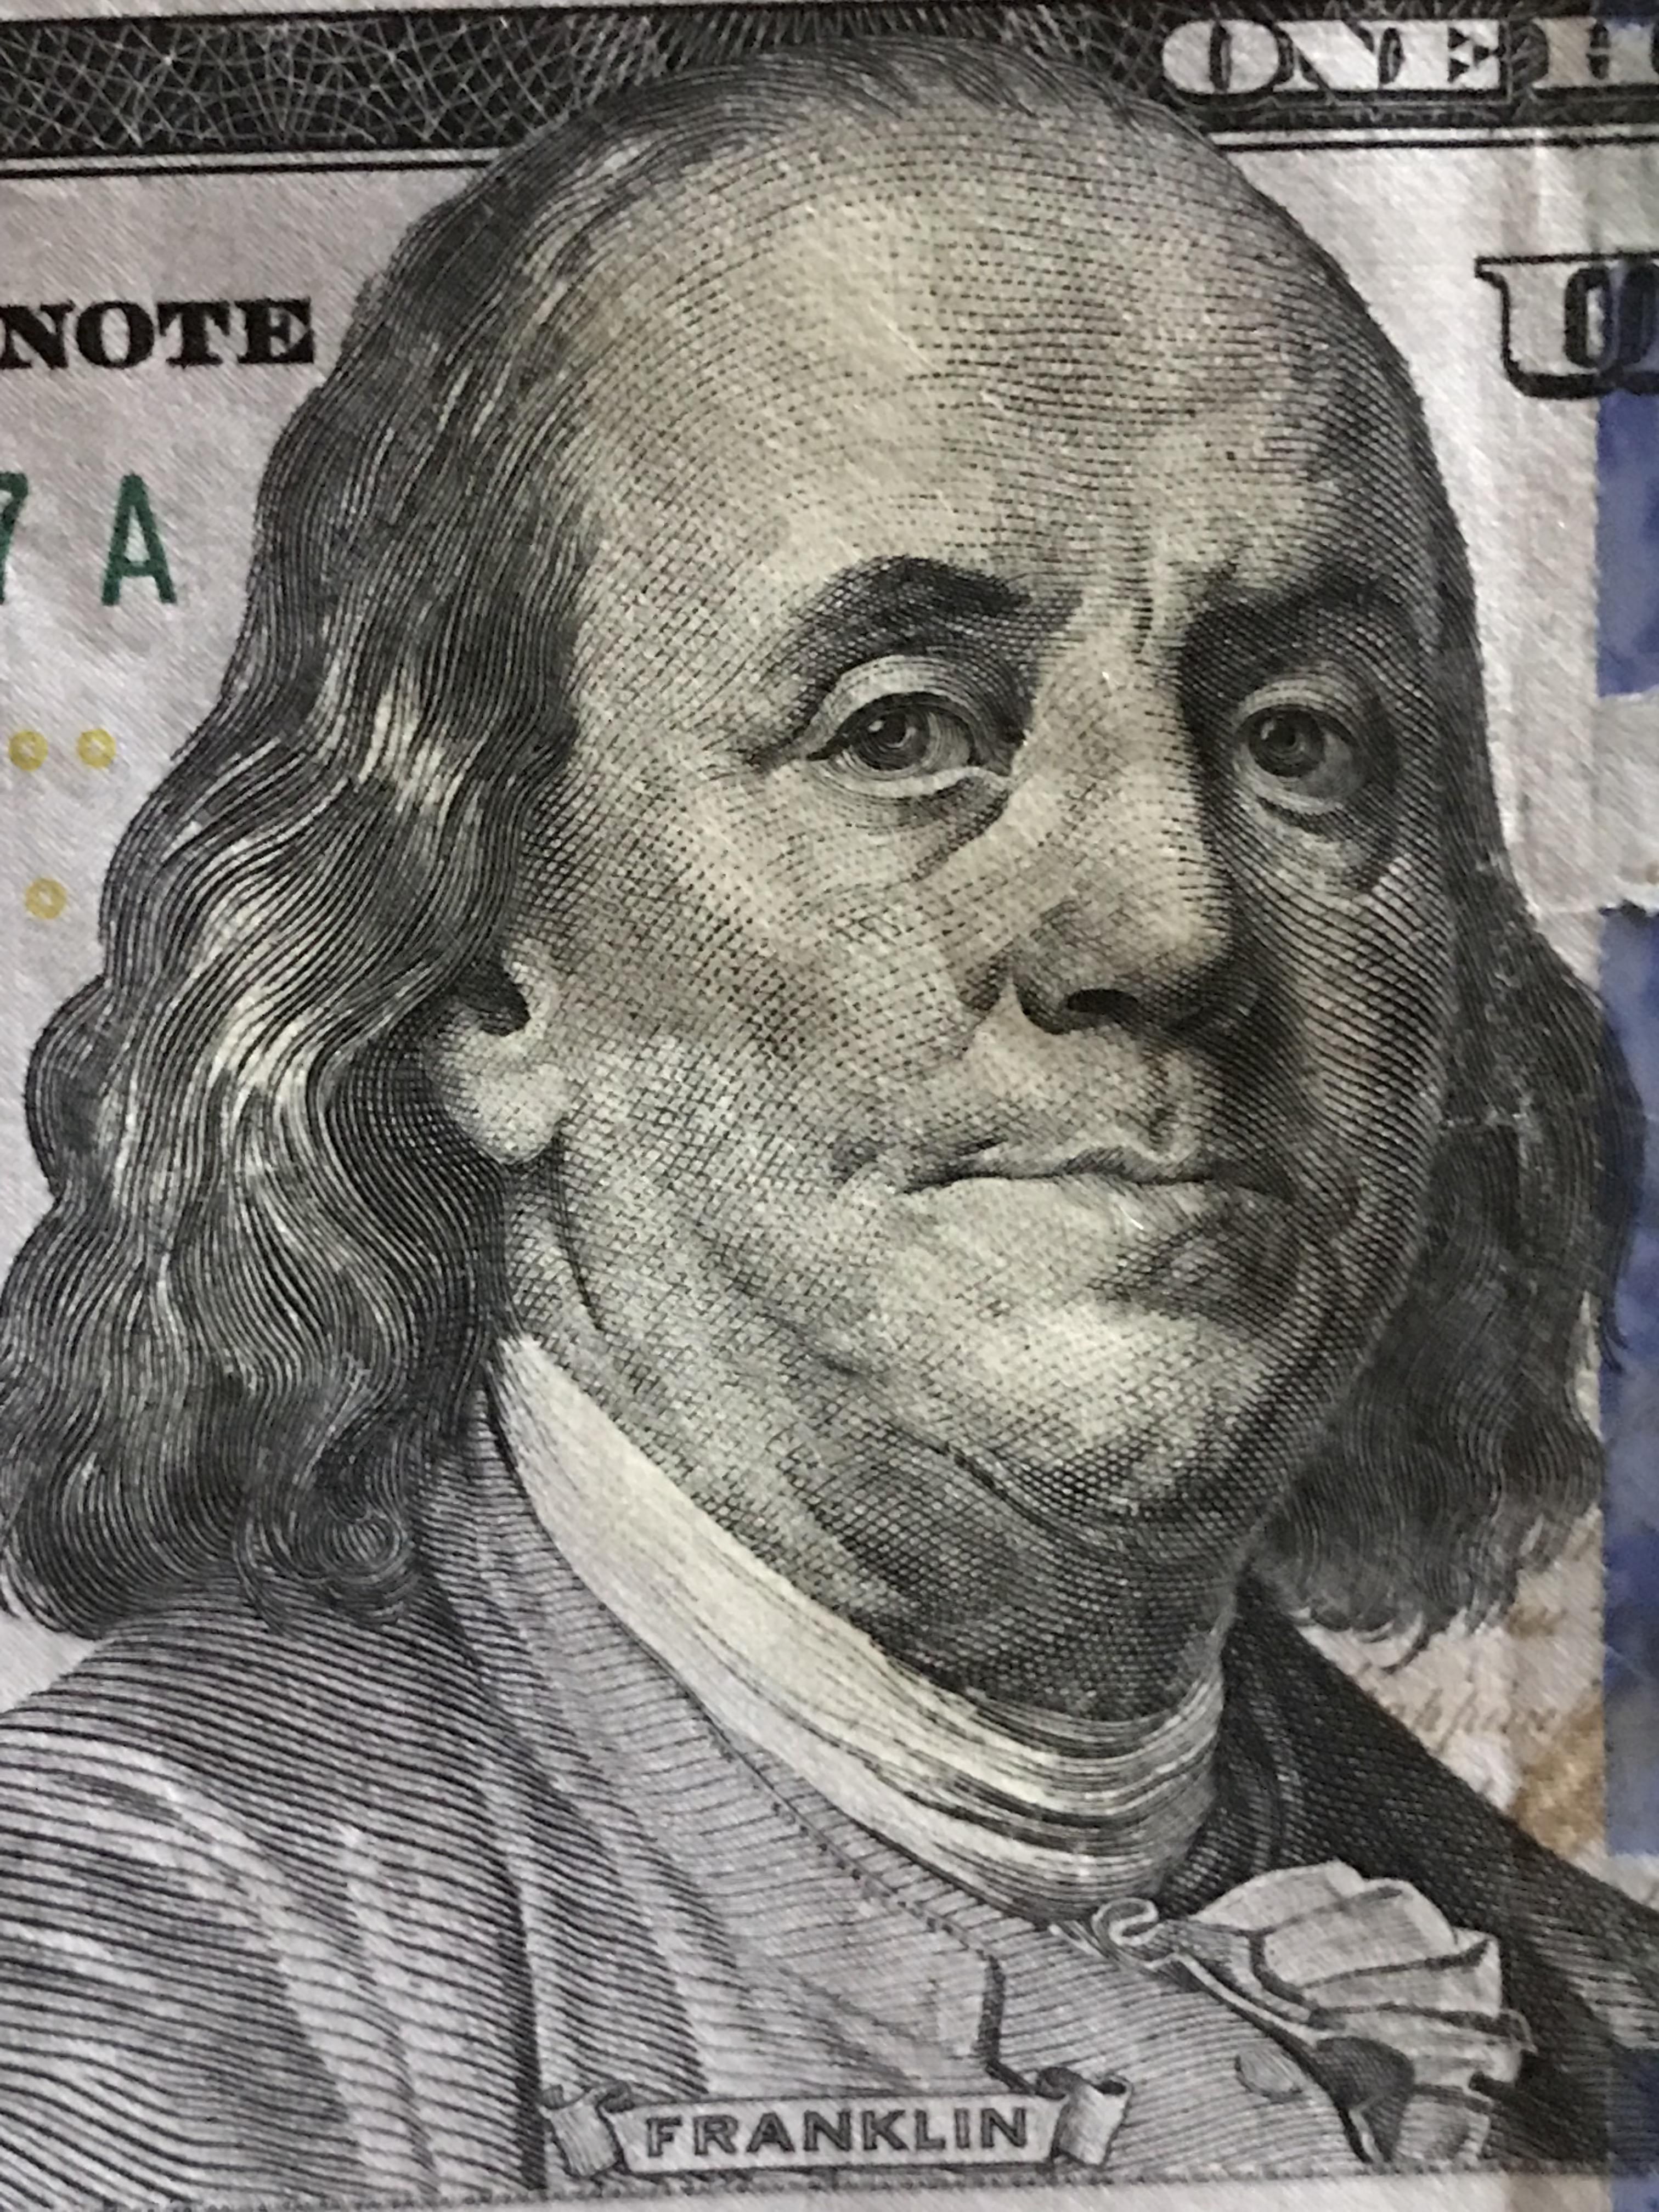 This is the face I make when someone hands me a $100 bill for their $3.11 total...